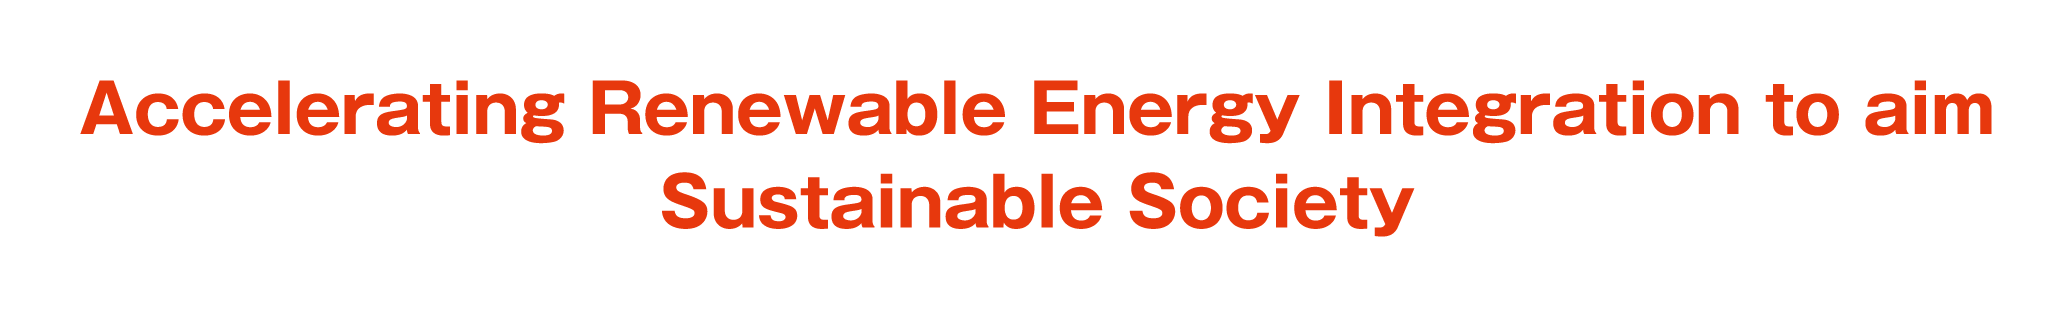 Accelerating Renewable Energy Integration to aim Sustainable Society